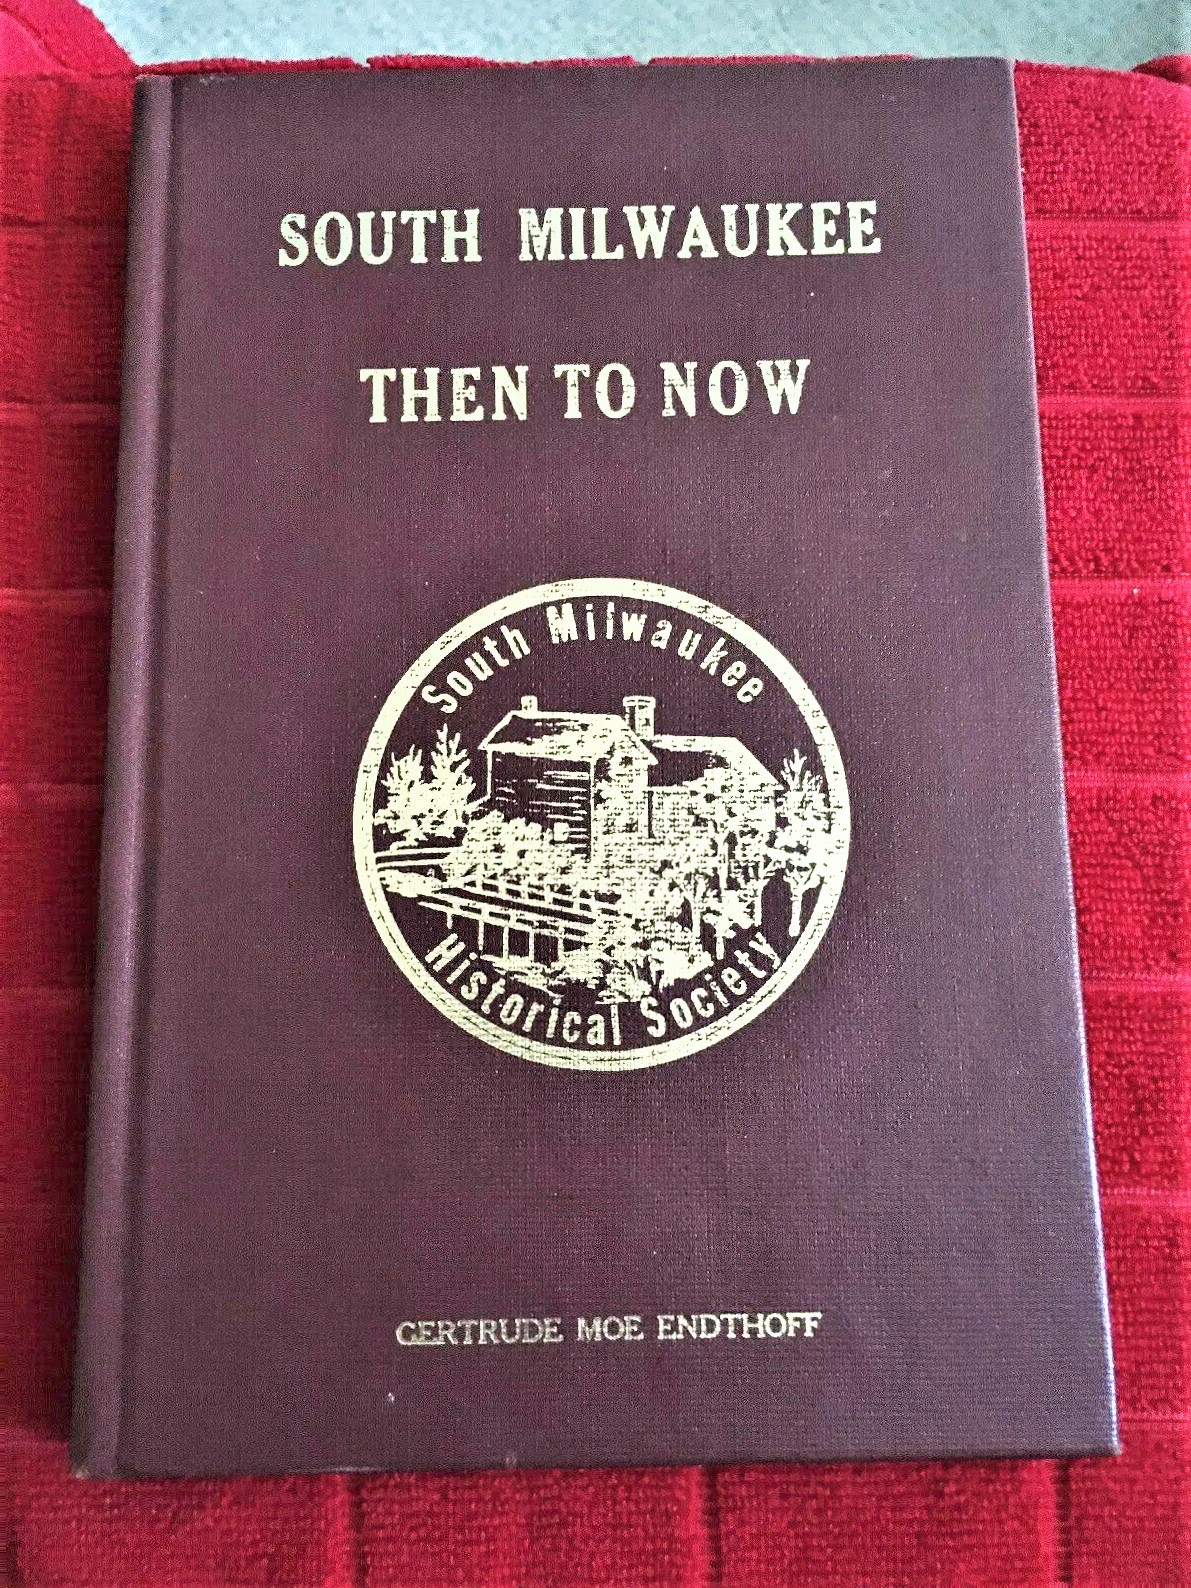 Willms and Zeiger Source Book 1955.jpg